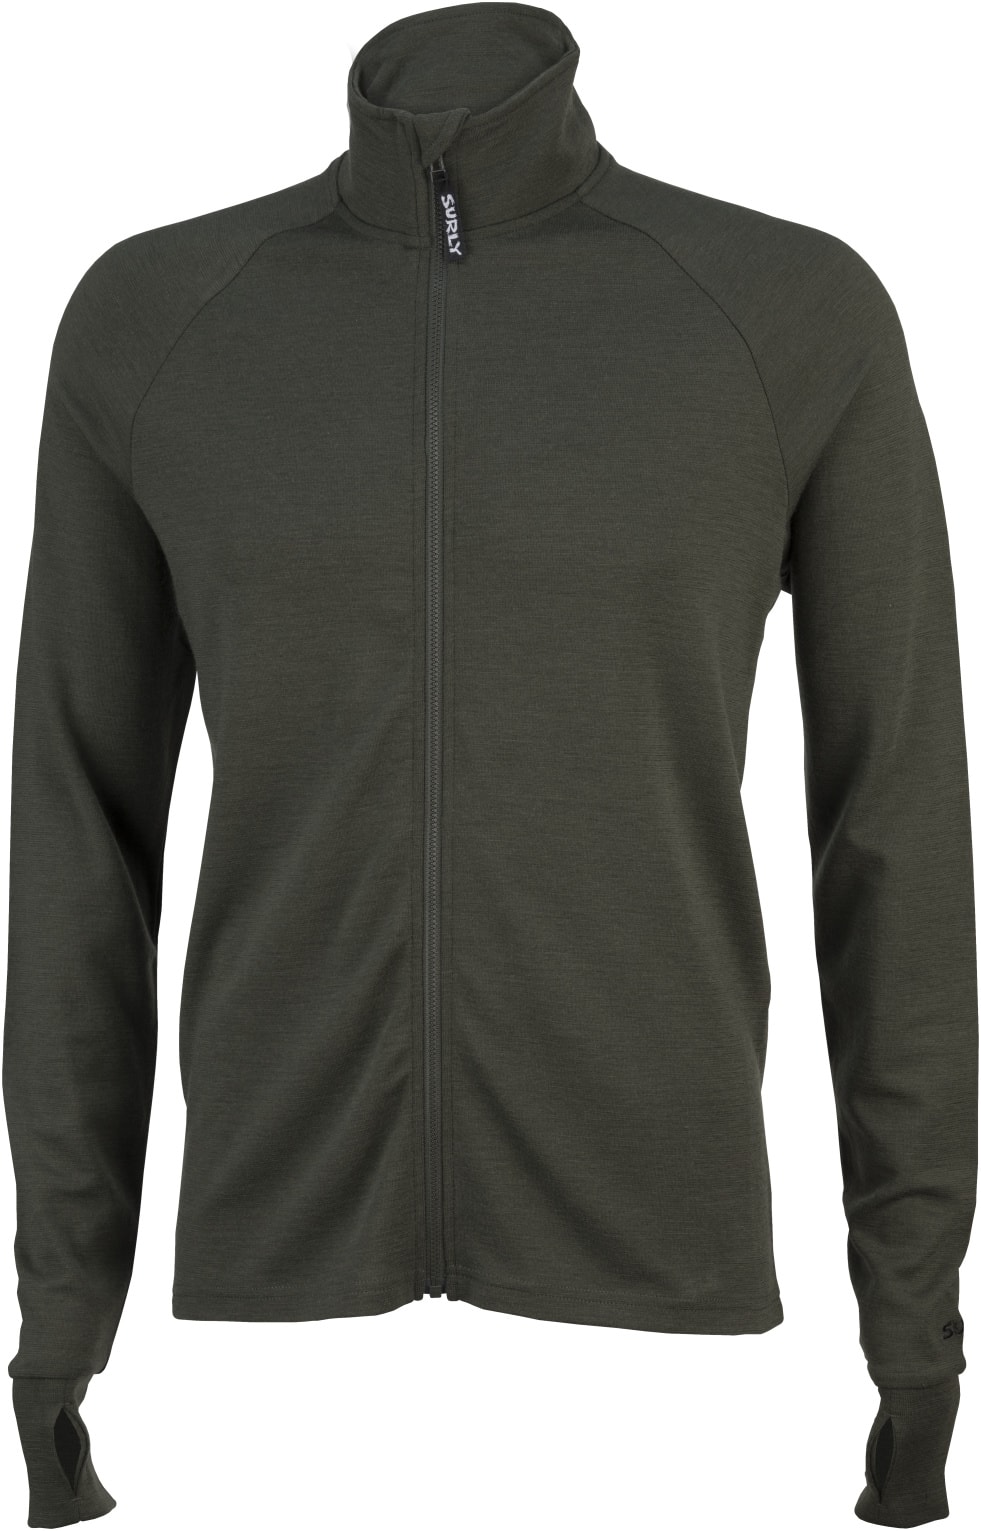 Surly full zip long sleeve bike jersey - olive drab - front view